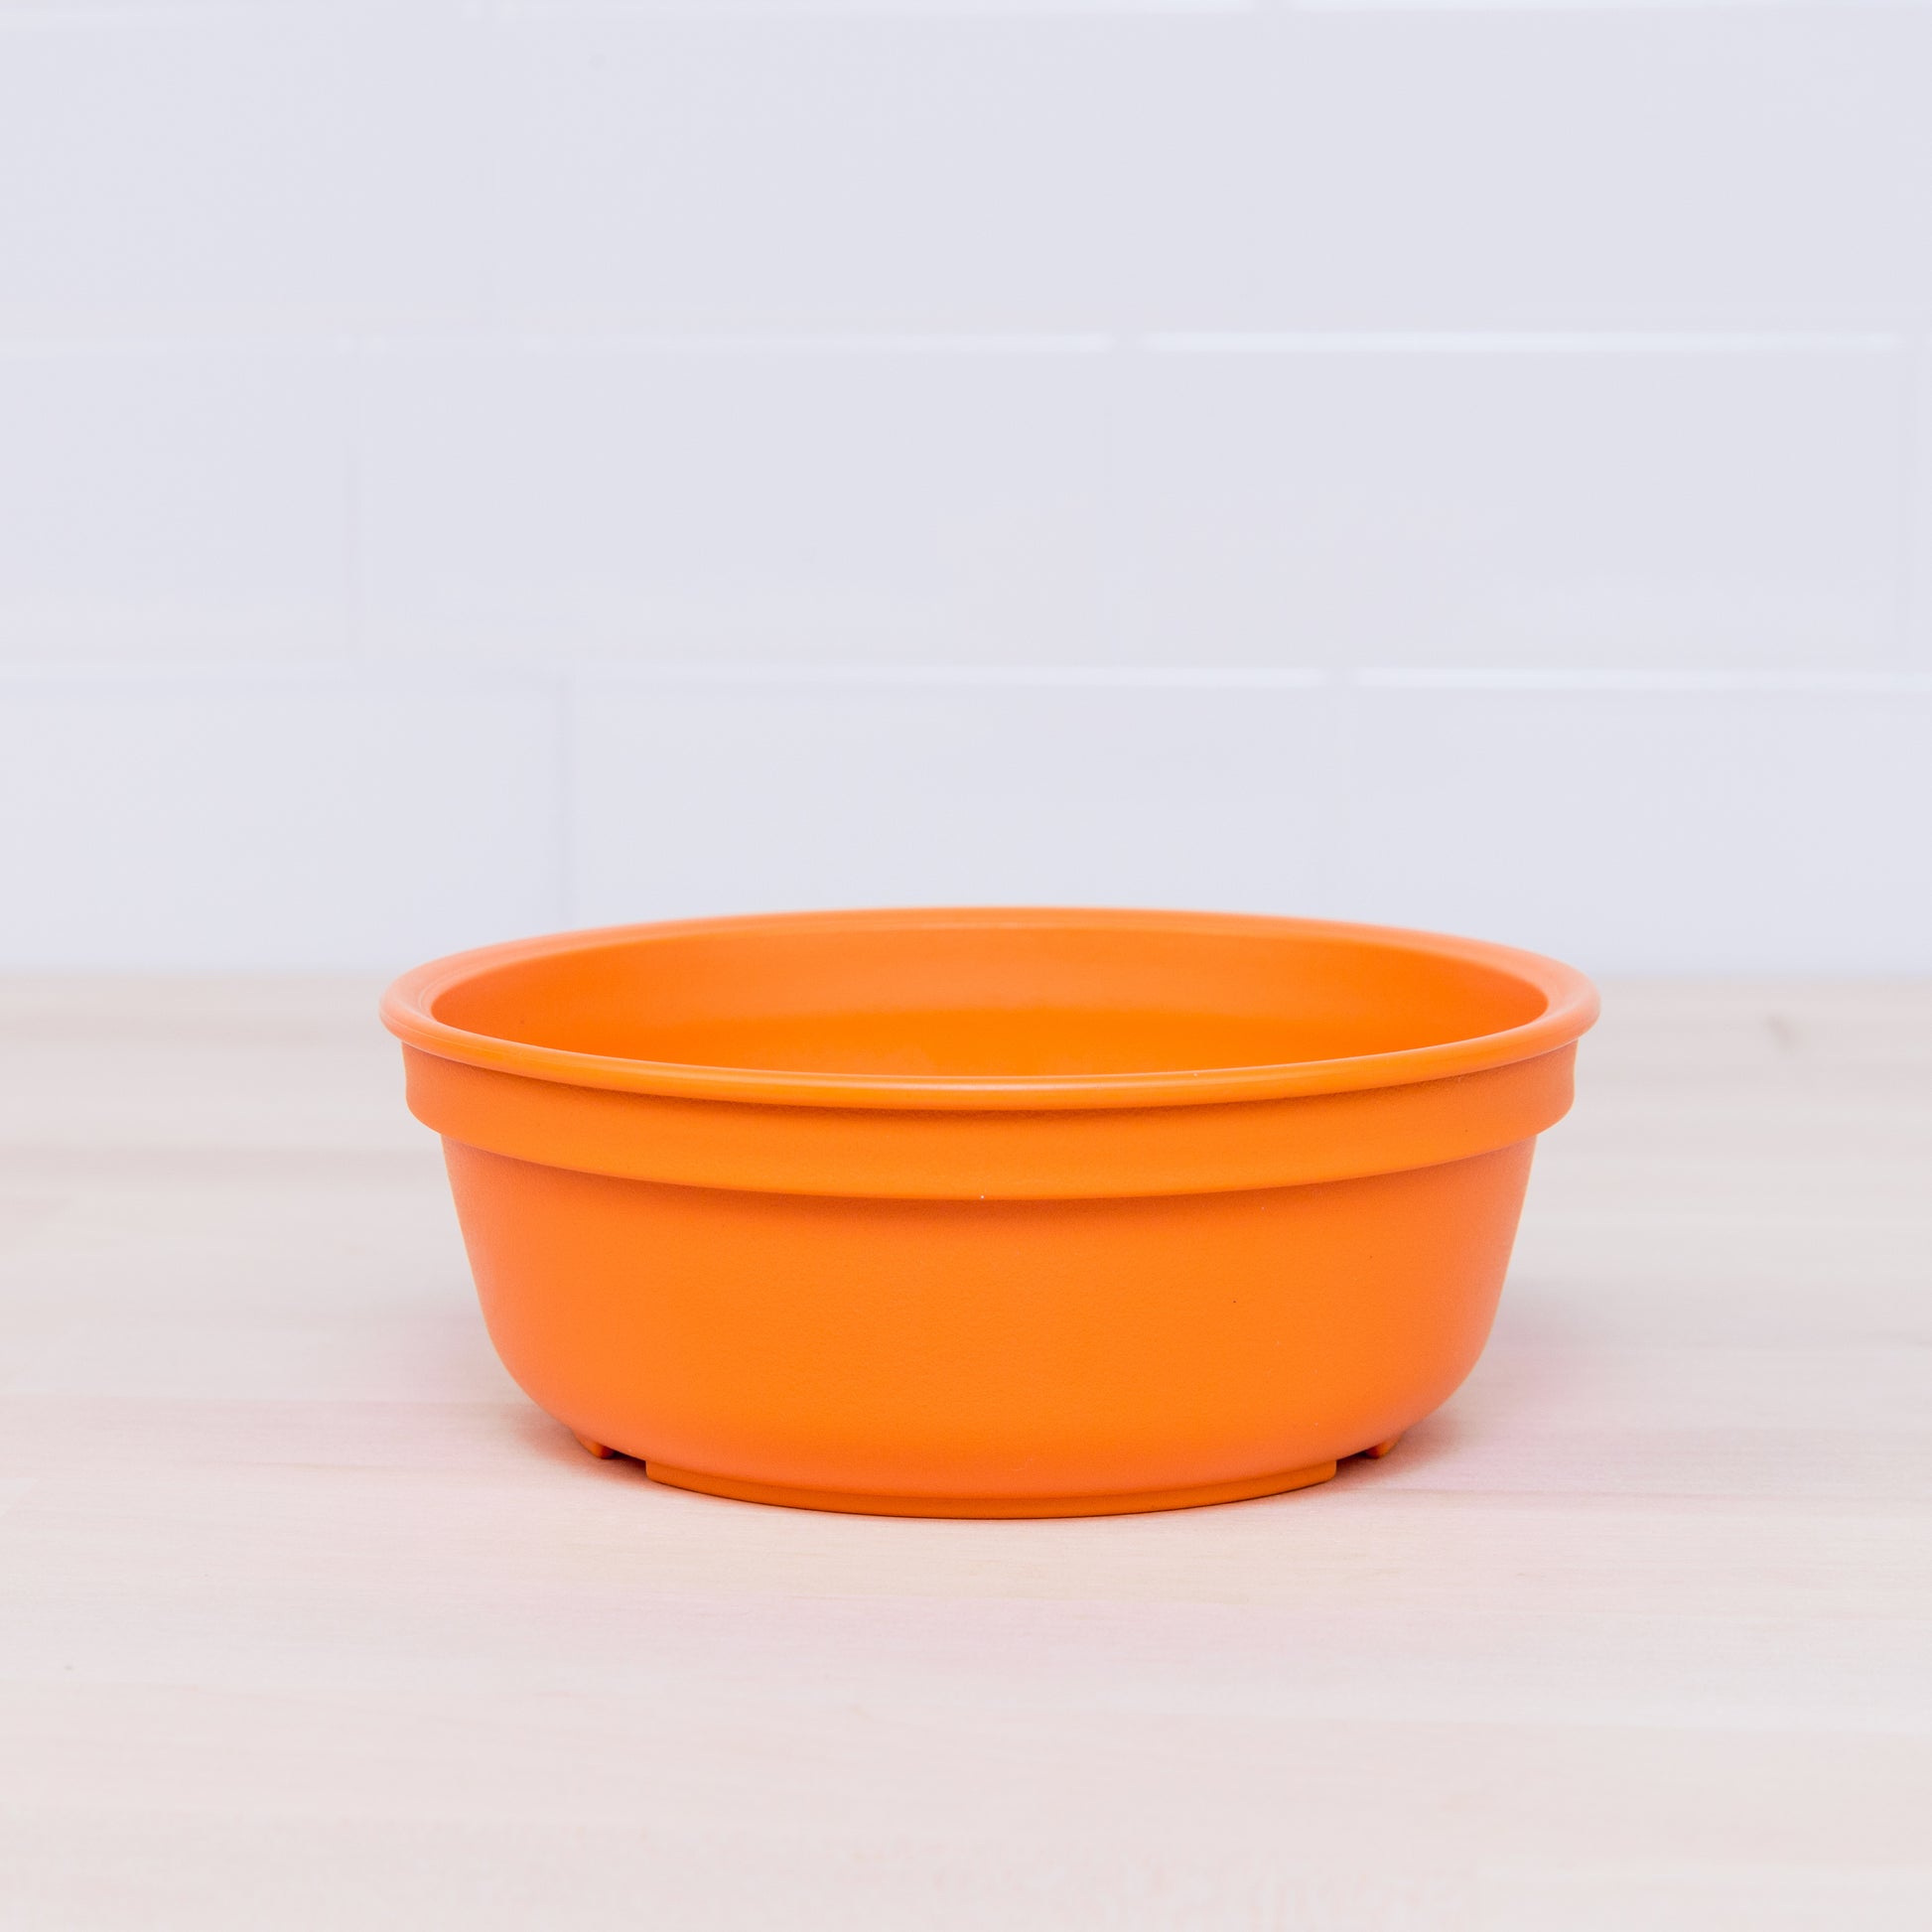 Re-Play Bowl | Standard Size in Orange from Bear & Moo